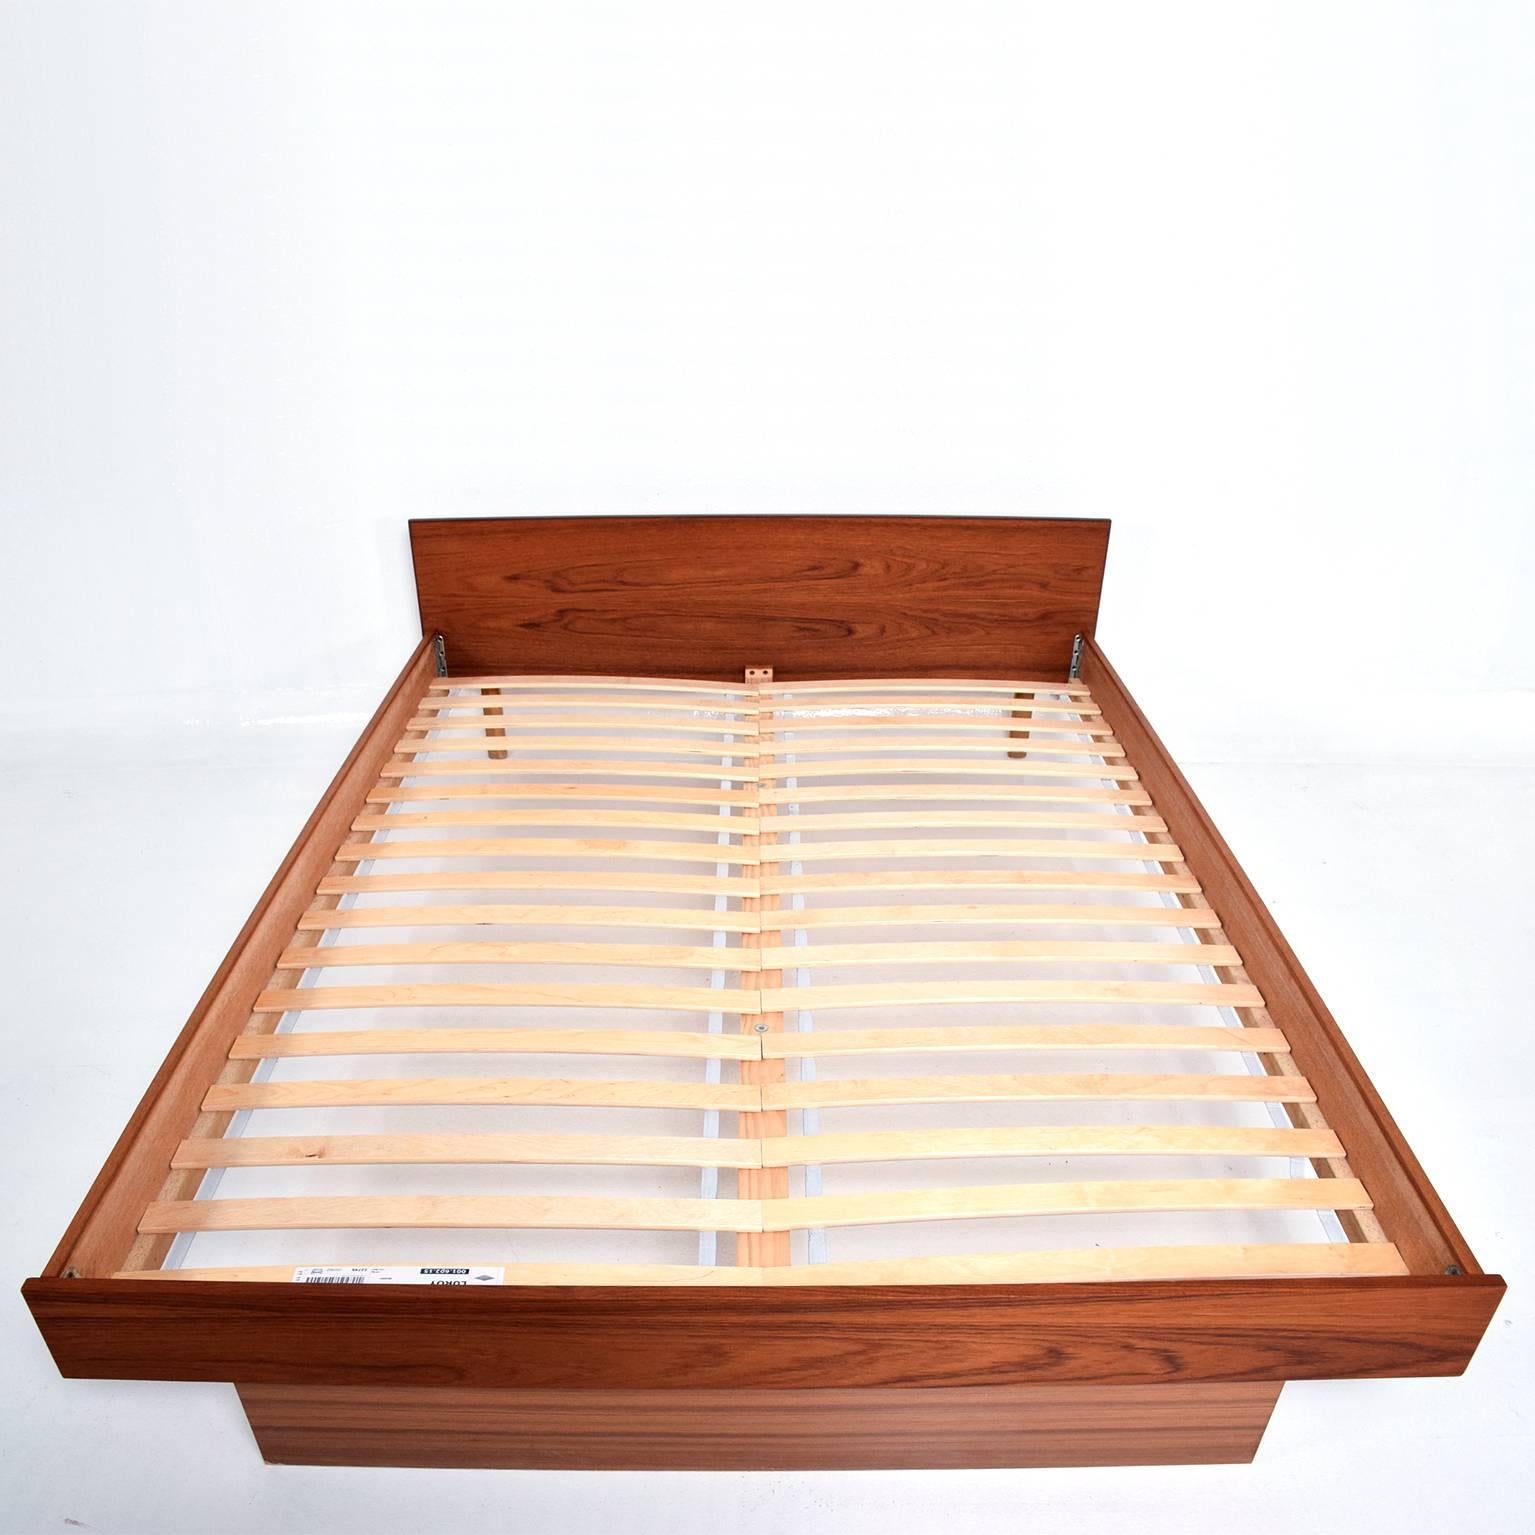 A Danish modern teak platform bed. Queen size. 
Unmarked, no label from the maker. 
Clean modern lines. 
Bed includes the wood slats. 
Dimensions: 23 3/4"H x 63" W x 81" D, Bed area 60 1/2" W.